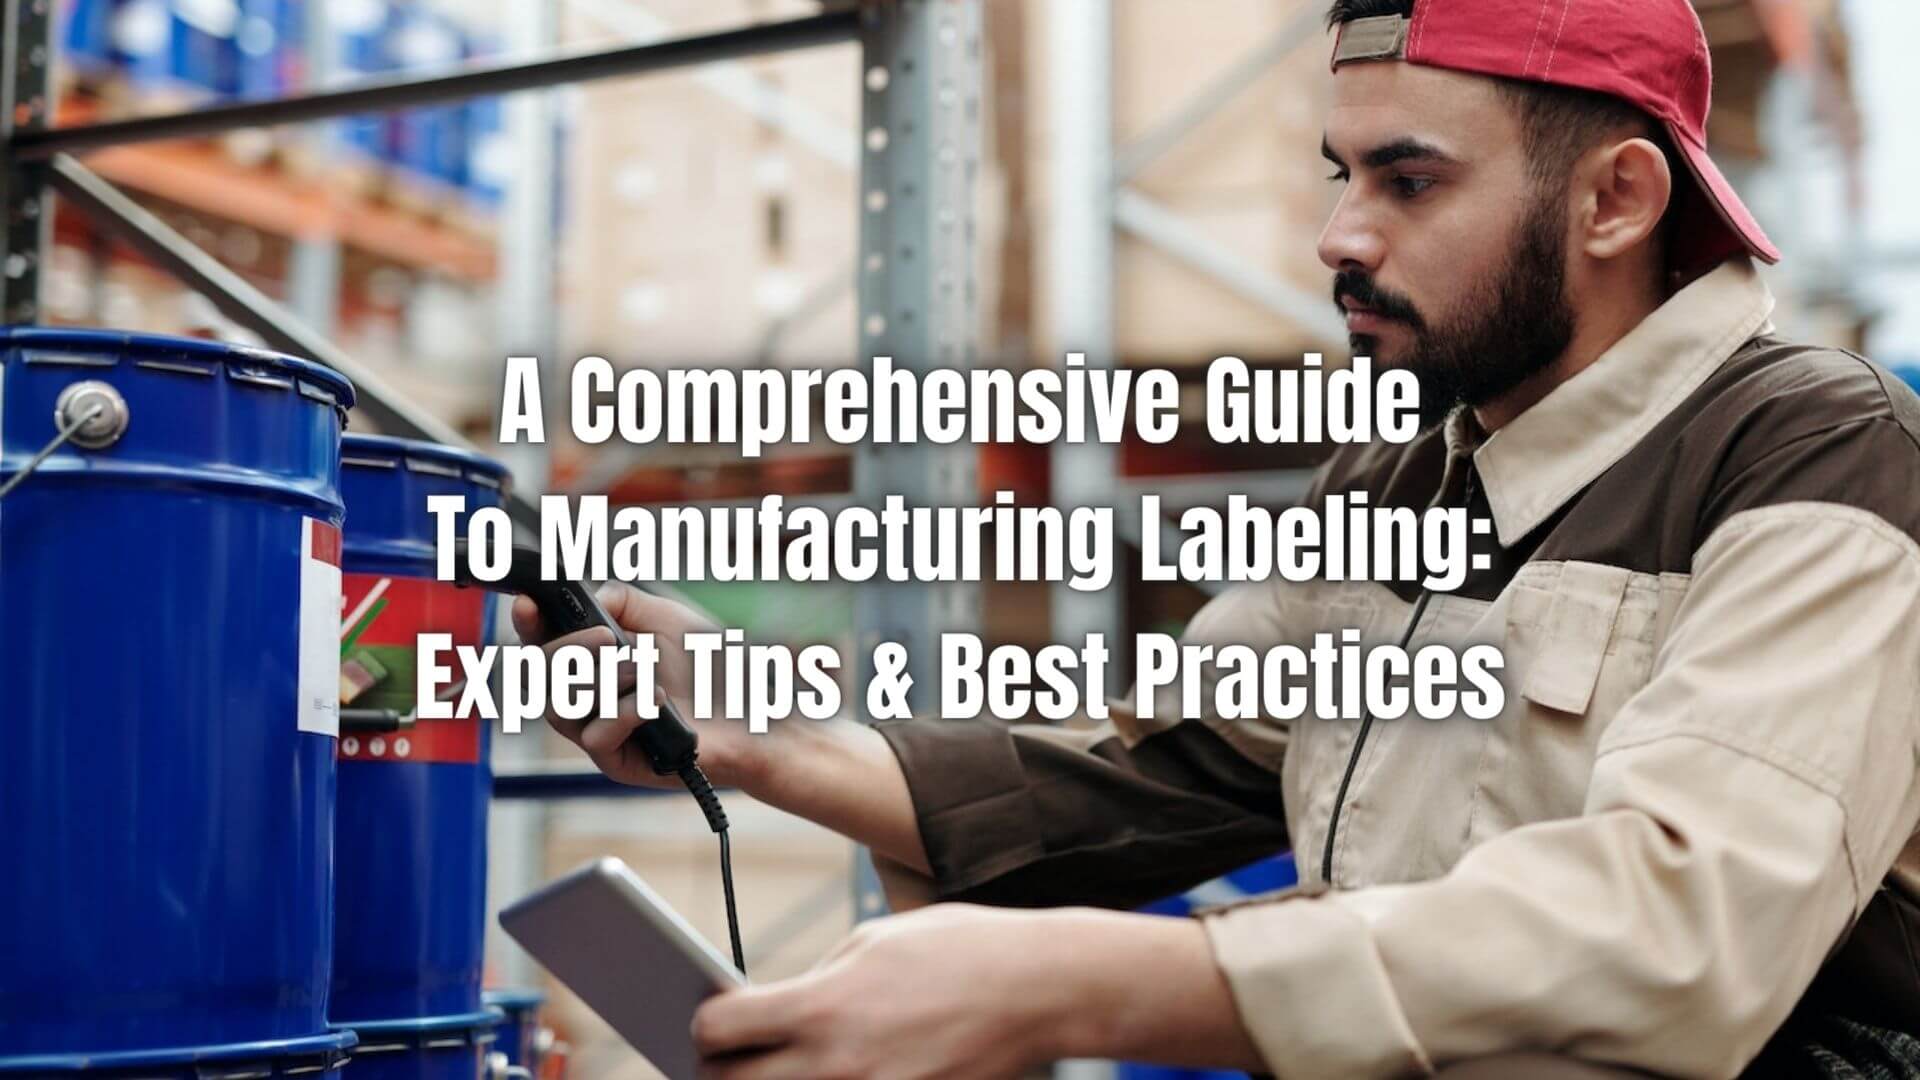 A Comprehensive Guide To Manufacturing Labeling Expert Tips & Best Practices